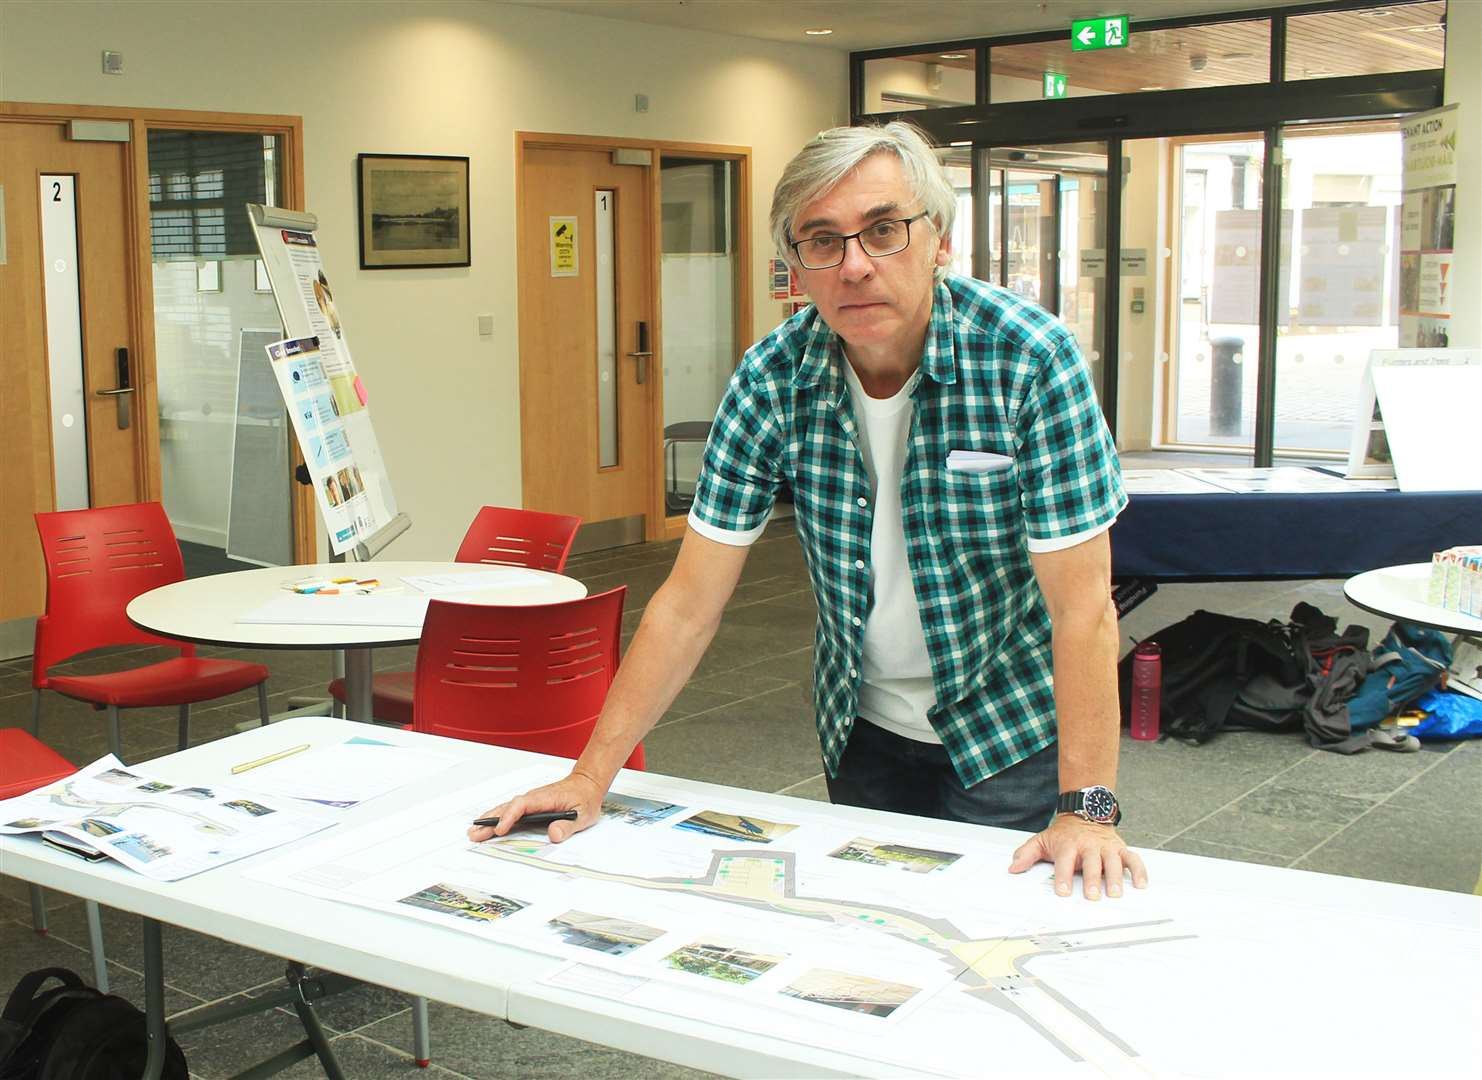 Allan Farquhar, chairman of the Royal Burgh of Wick Community Council, at a drop-in event in Caithness House last August marking the launch of the Wick Lanes Pocket Places project.